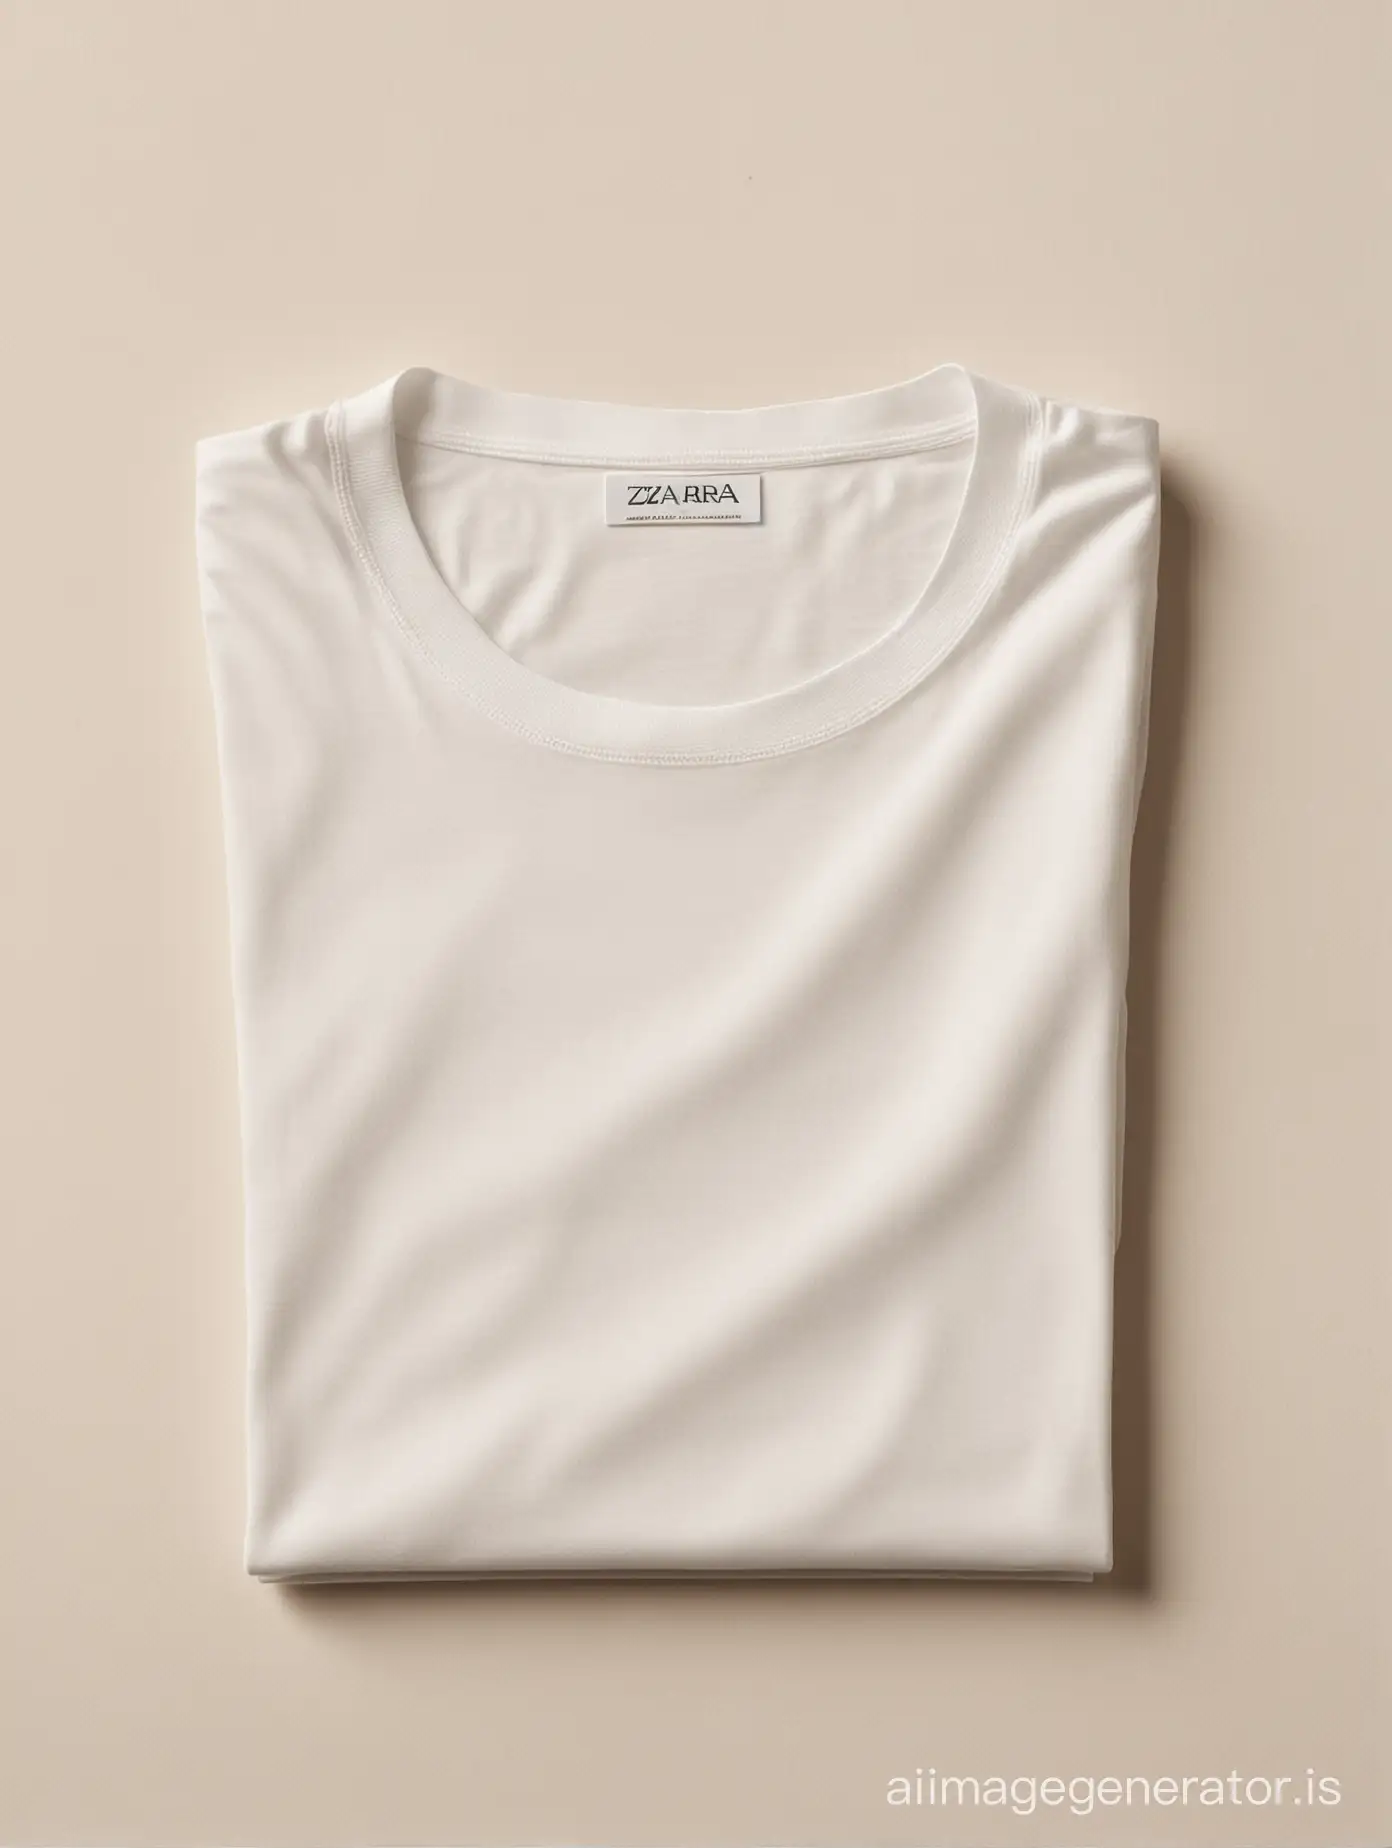 A high-resolution photo of a perfectly folded and ironed flat square BELLA CANVAS white  t-shirt with one white label , styled for a Zara brand catalog. The сollar of the t shirt  is completely smooth with no stitching or texture. Warm natural sunlight streams in from the left side of the image, highlighting the rich texture  of the natural fabric. The t-shirt should be meticulously folded into a square, with sharp edges and no wrinkles or imperfections. Imagine the fold as a series of precise rectangles stacked upon each other, creating a flawless geometric form. Maintain a minimalist, clean background for a polished look.